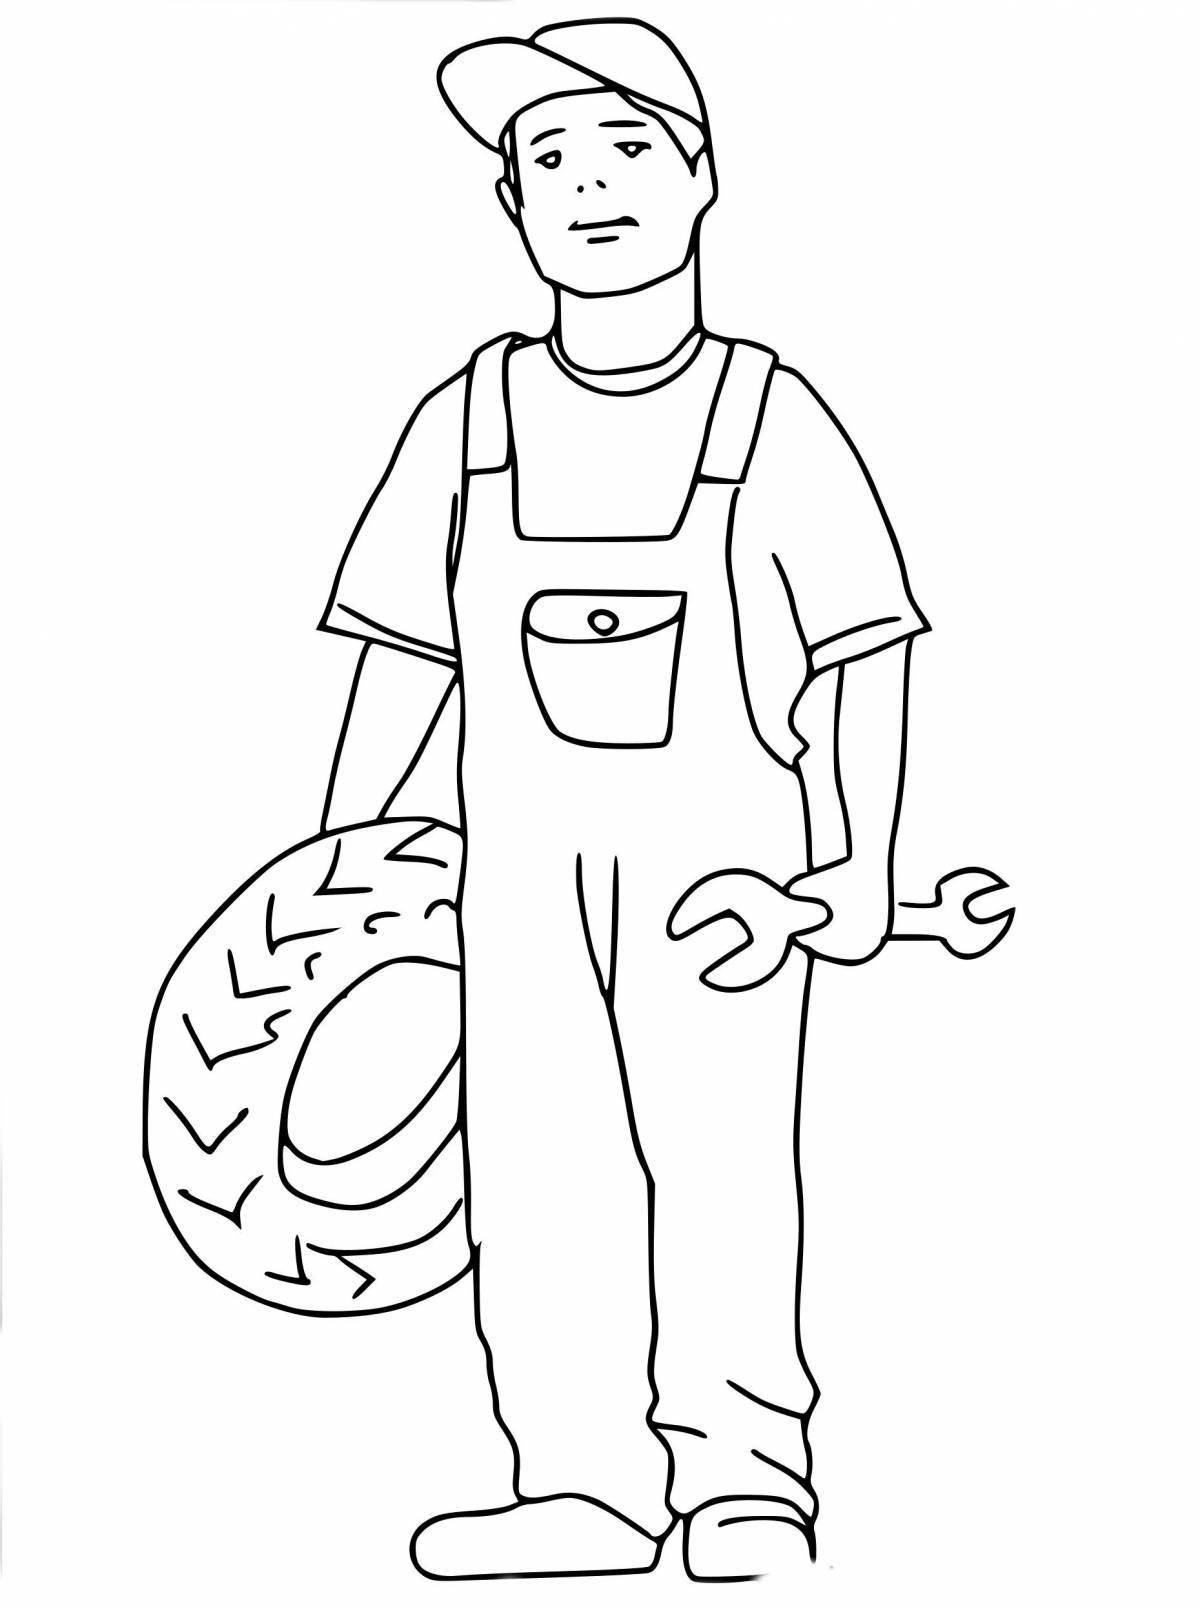 Coloring book funny car mechanic for kids